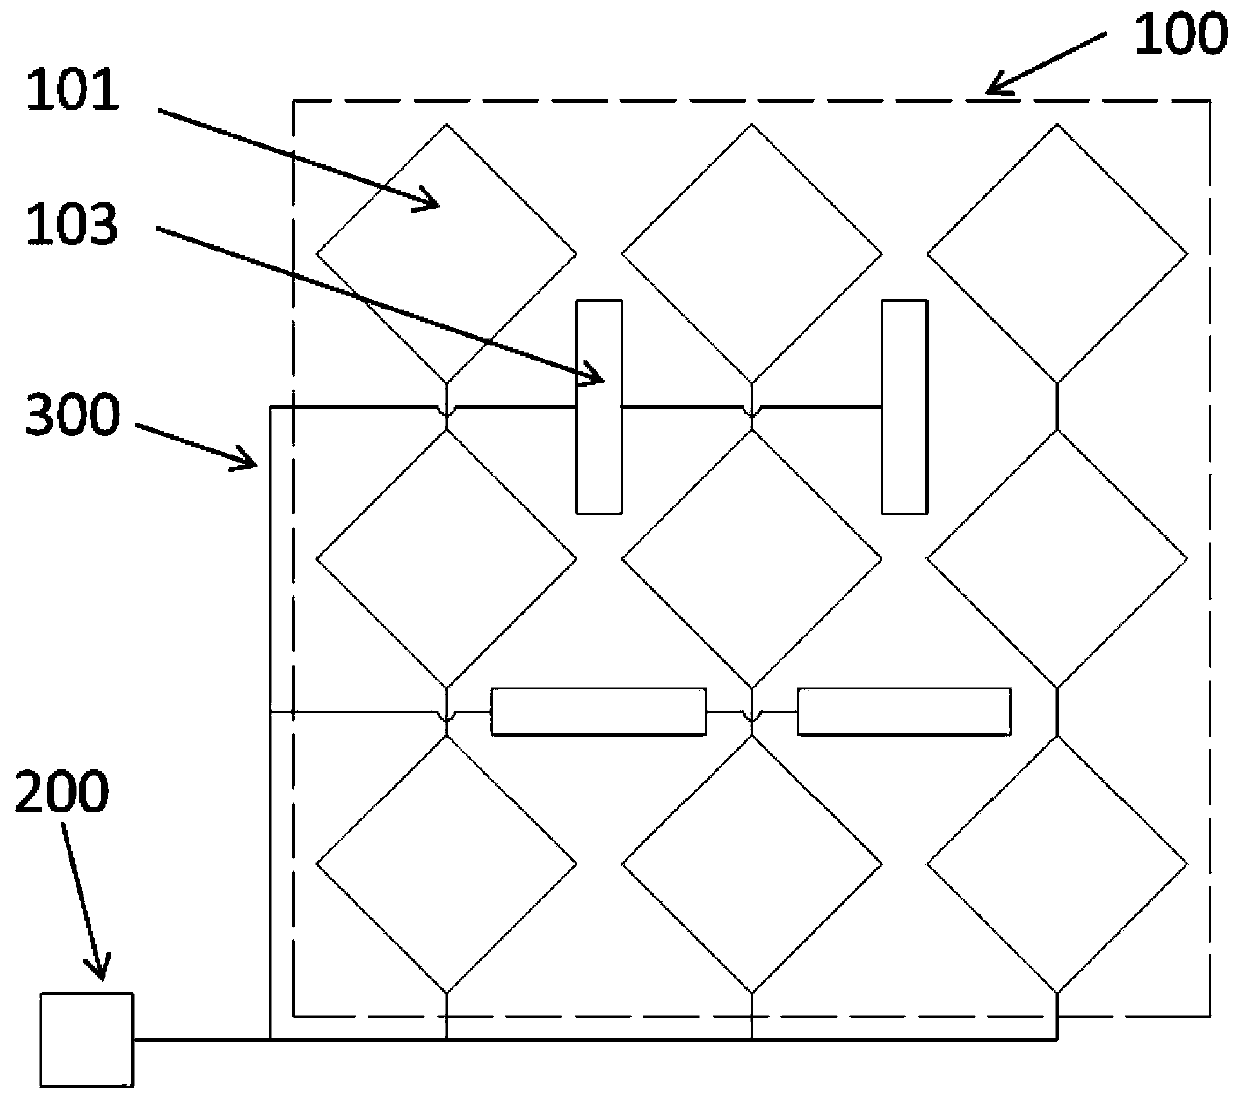 Wireless flexible patch antenna sensor array for metal structure crack and strain monitoring